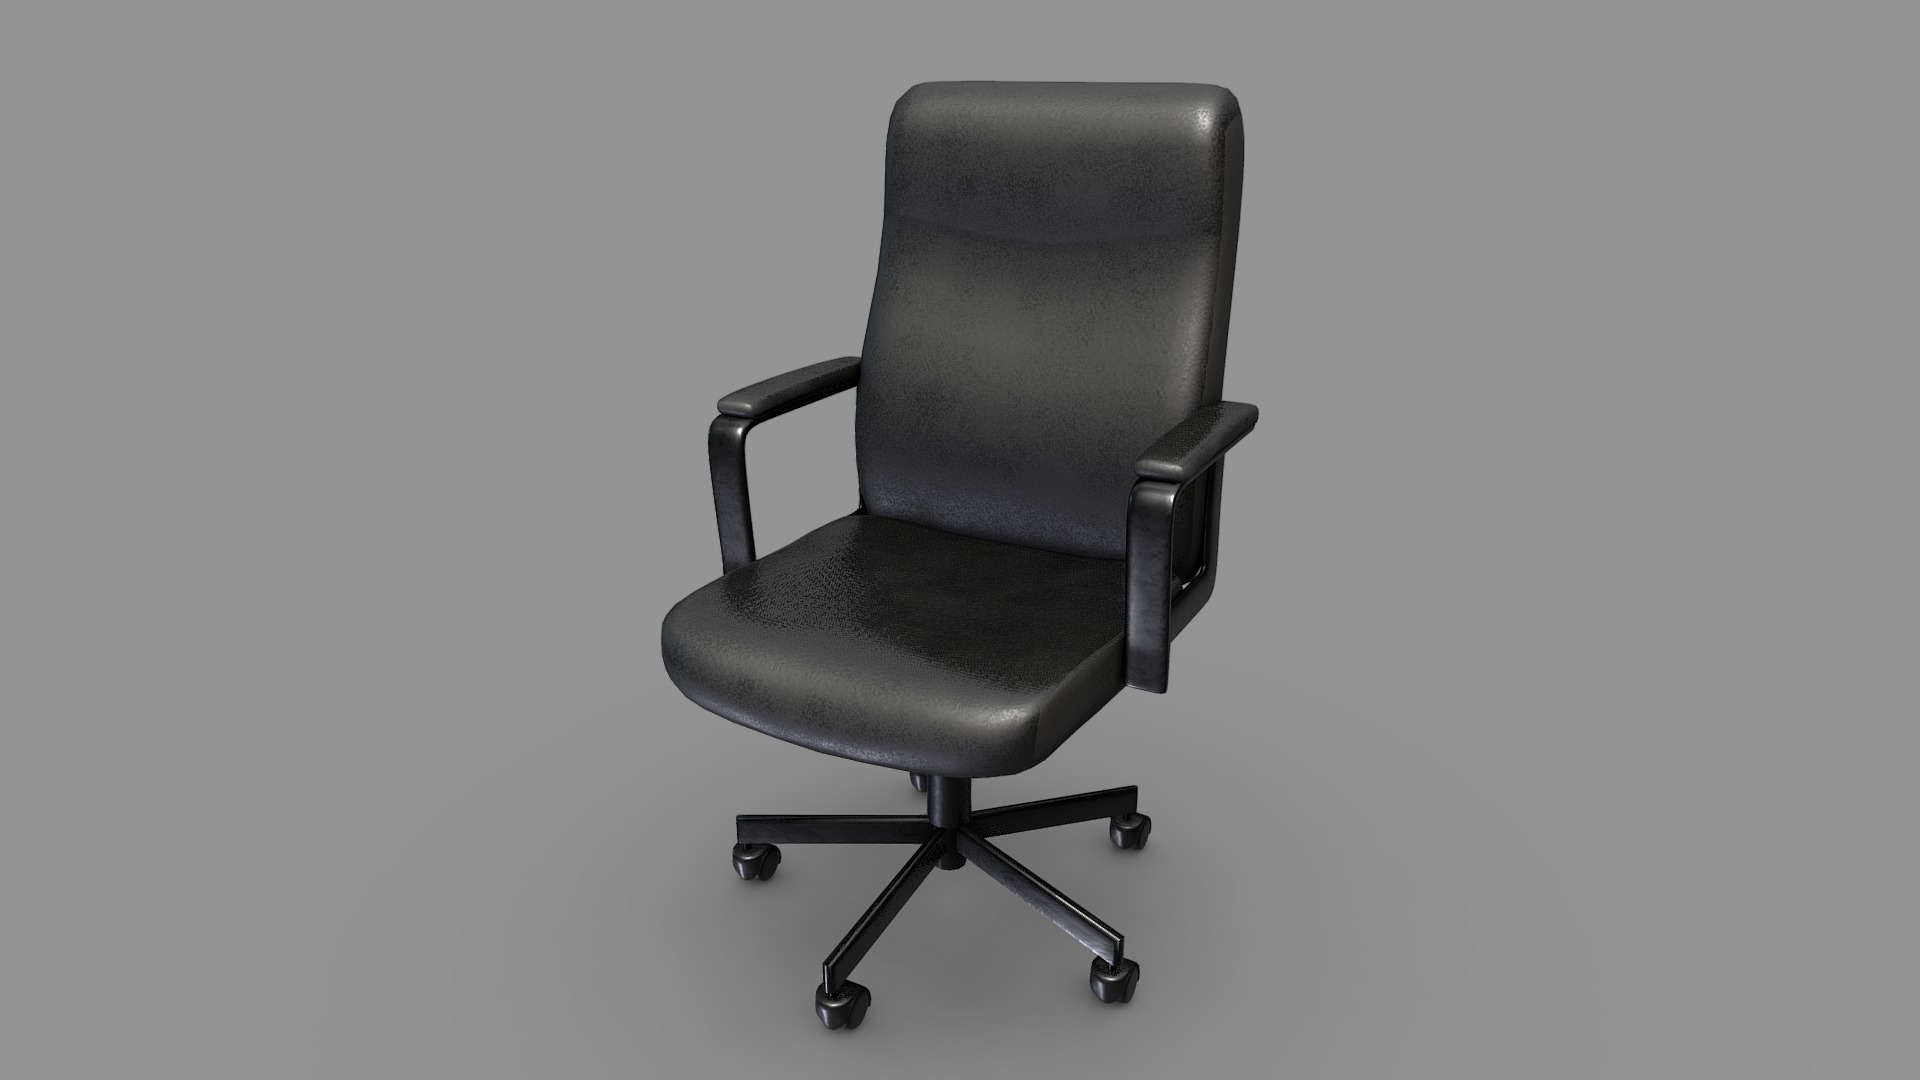 3D model Office Chair - This is a 3D model of the Office Chair. The 3D model is about a black office chair.